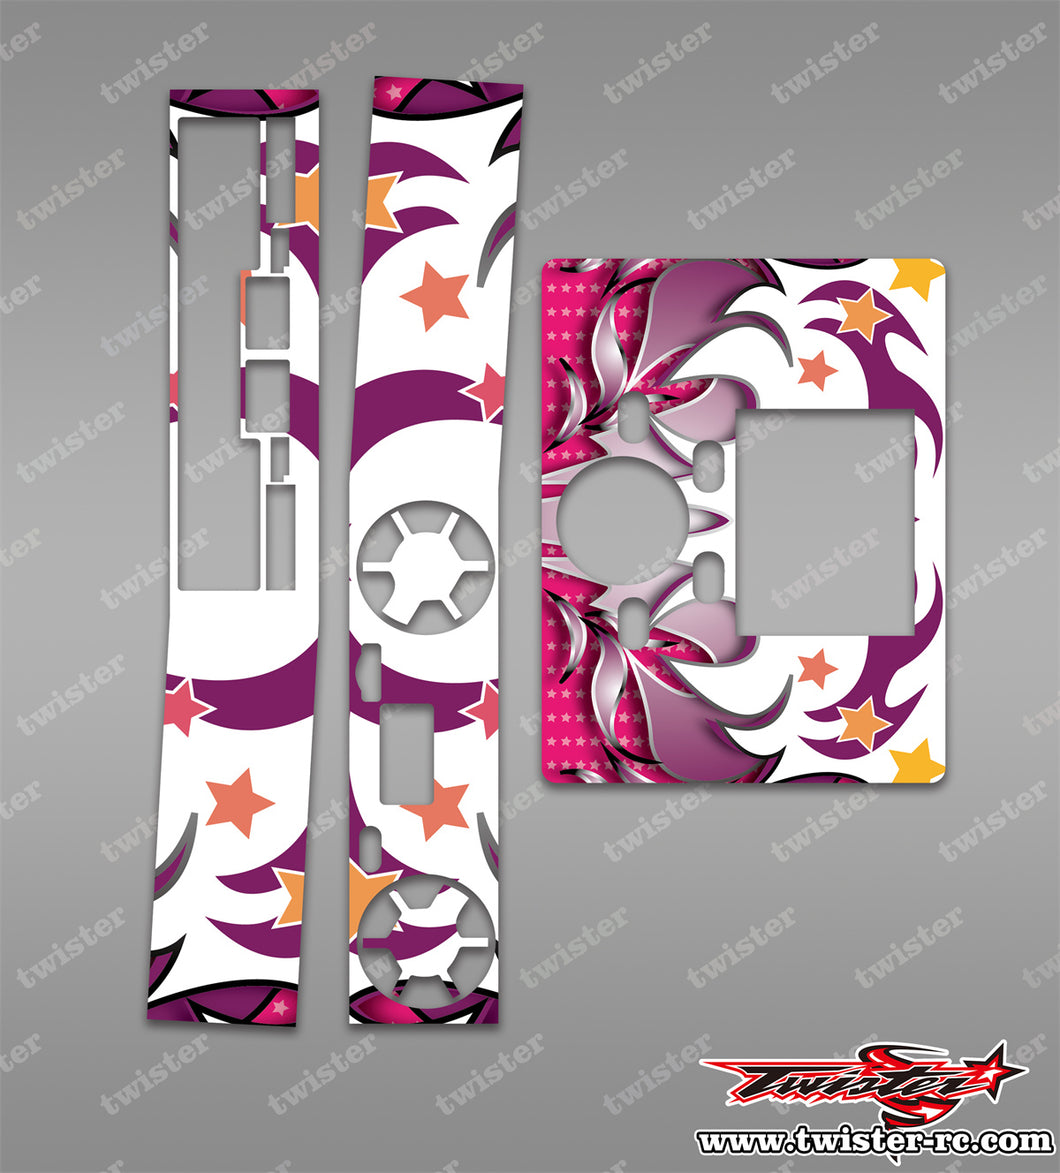 TR-DX8-MA13 icharger DX8 Metallic/Optical White Pattern Wrap ( Type A13 )4 Colors